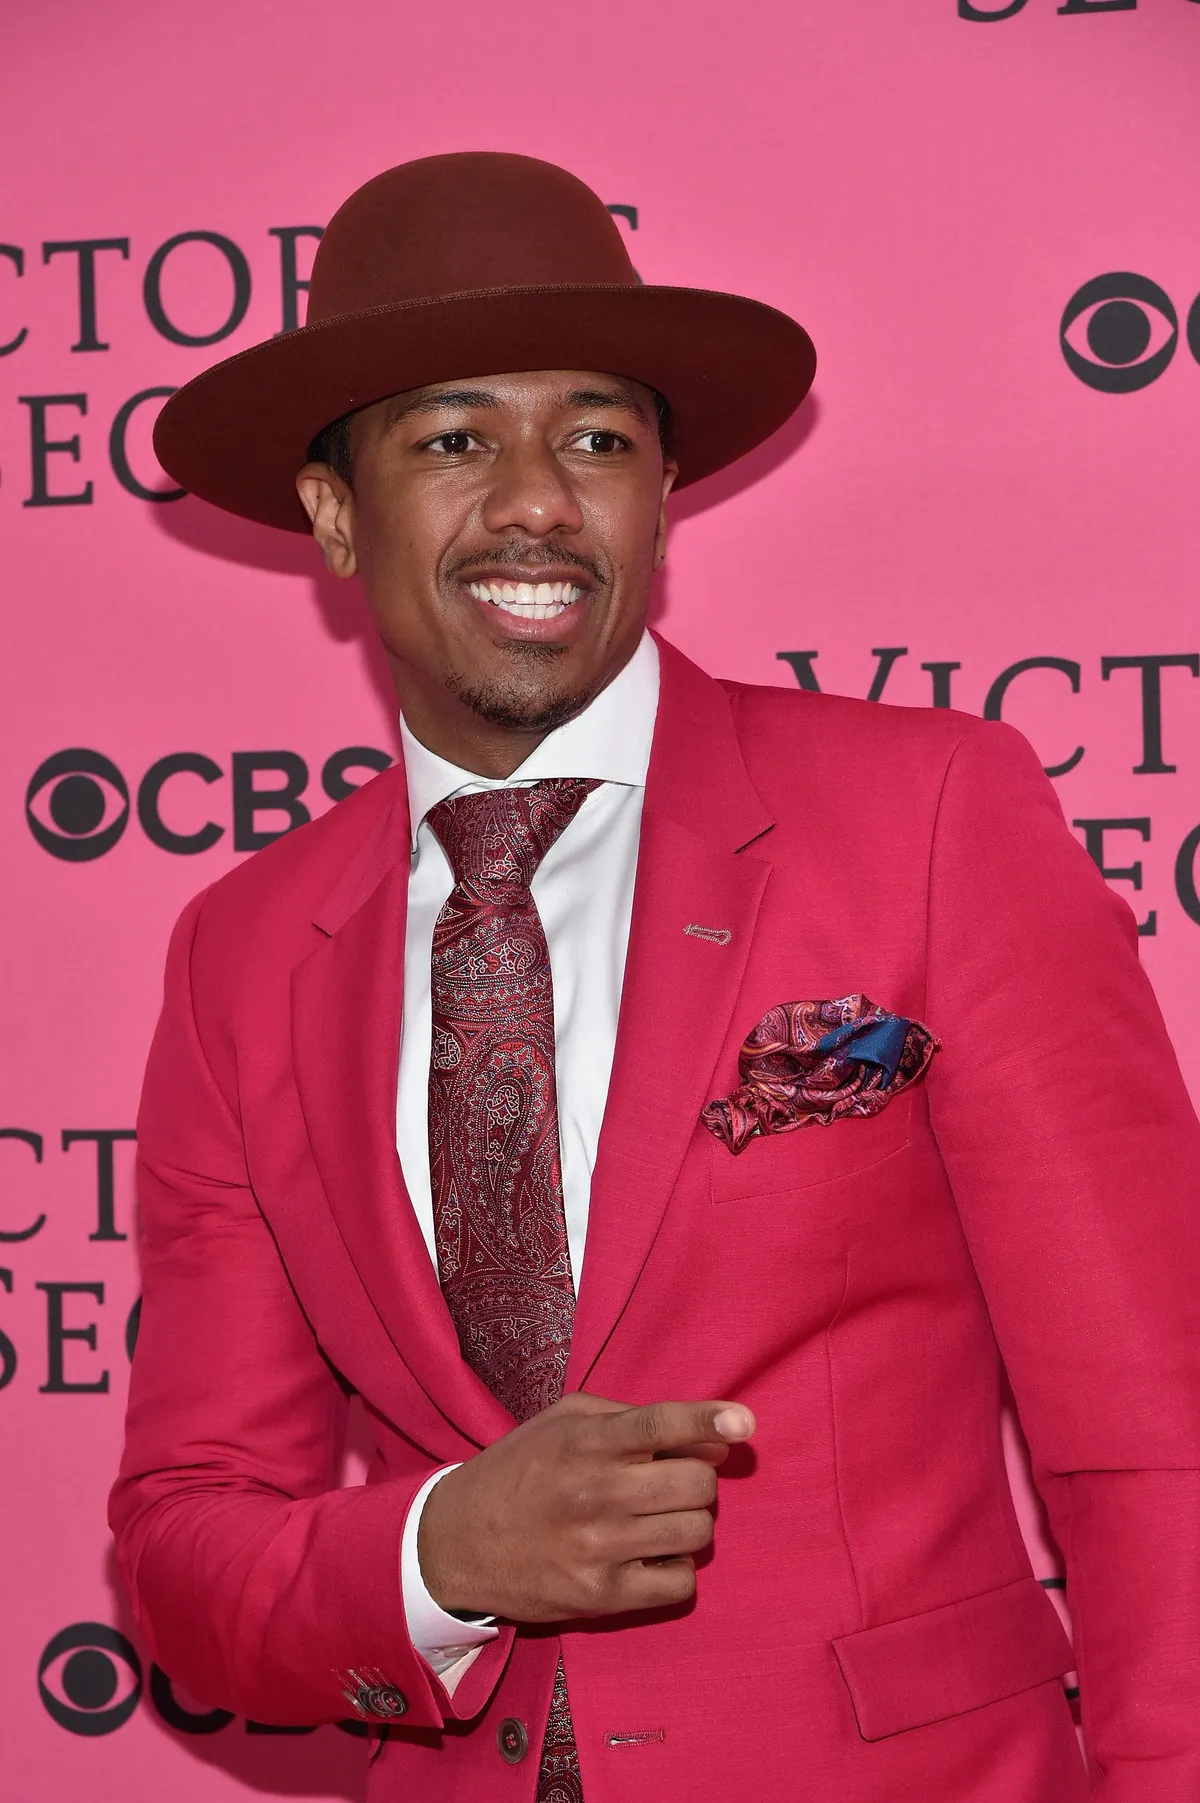 Nick Cannon arrives at the 2015 Victoria's Secret Fashion Show on November 10, 2015 | Photo: Getty Images